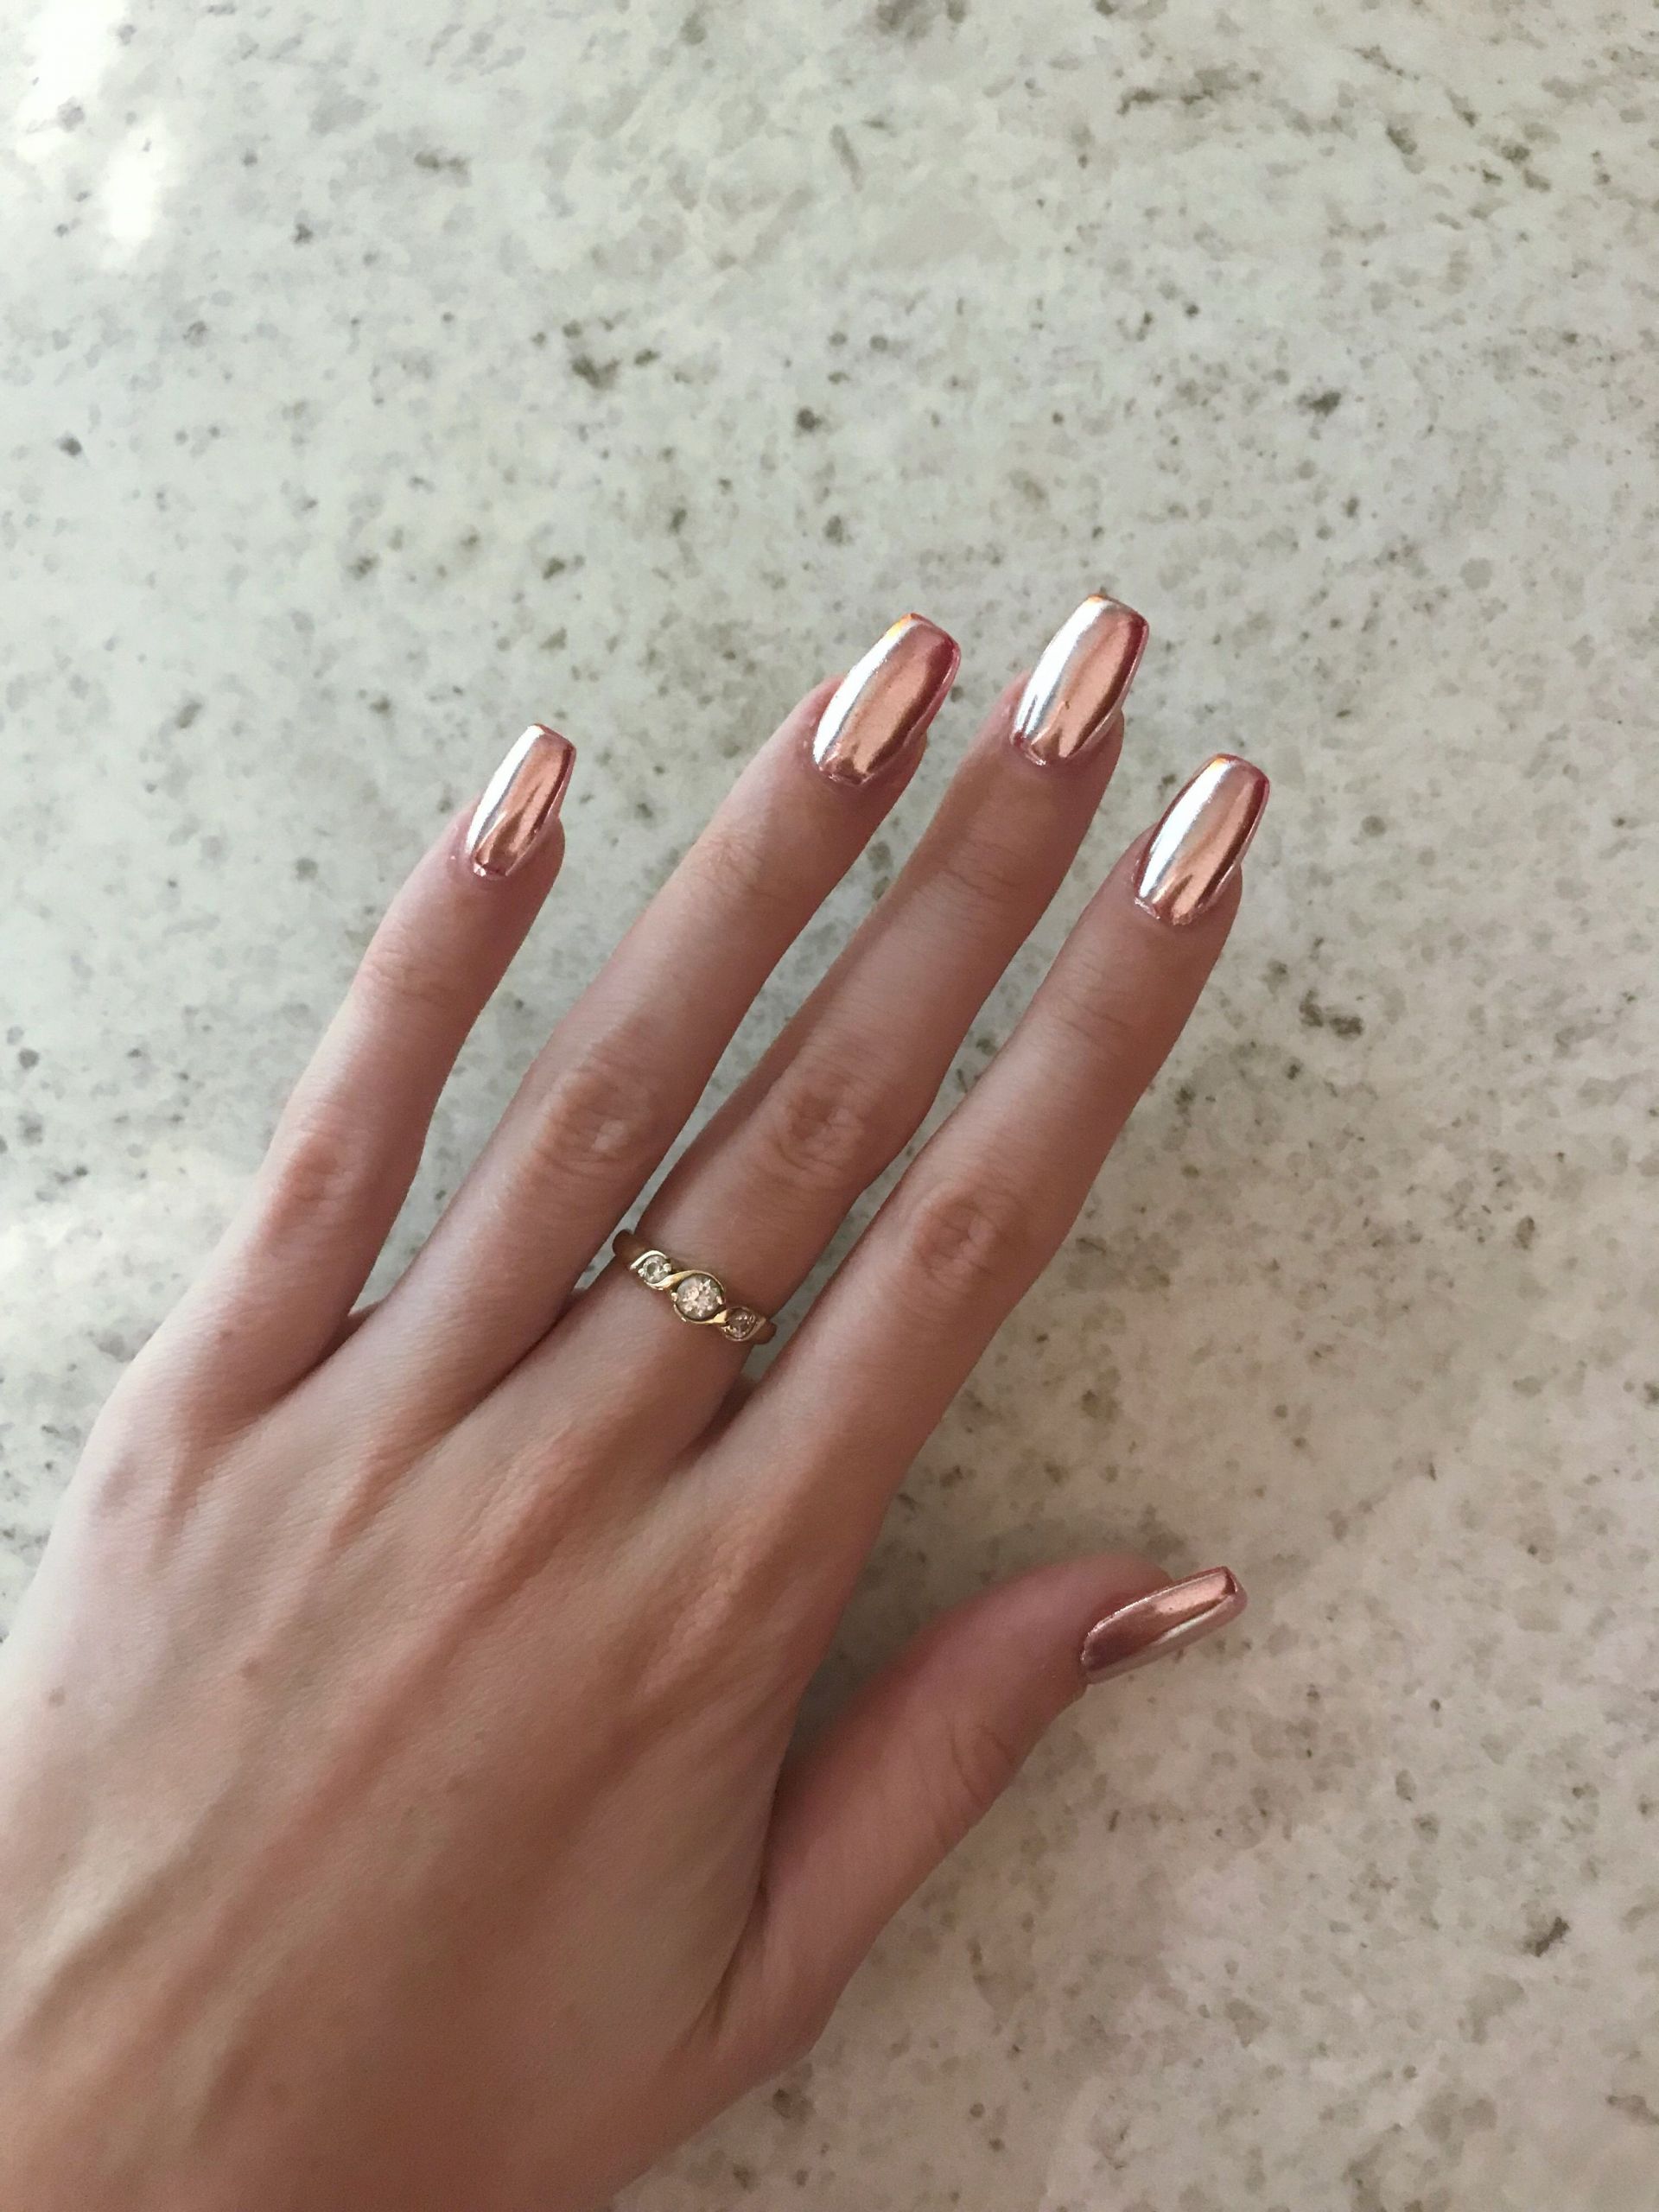 Rose Gold Nail Ideas
 Rose gold chrome gelish polygel nails by blyss beauty